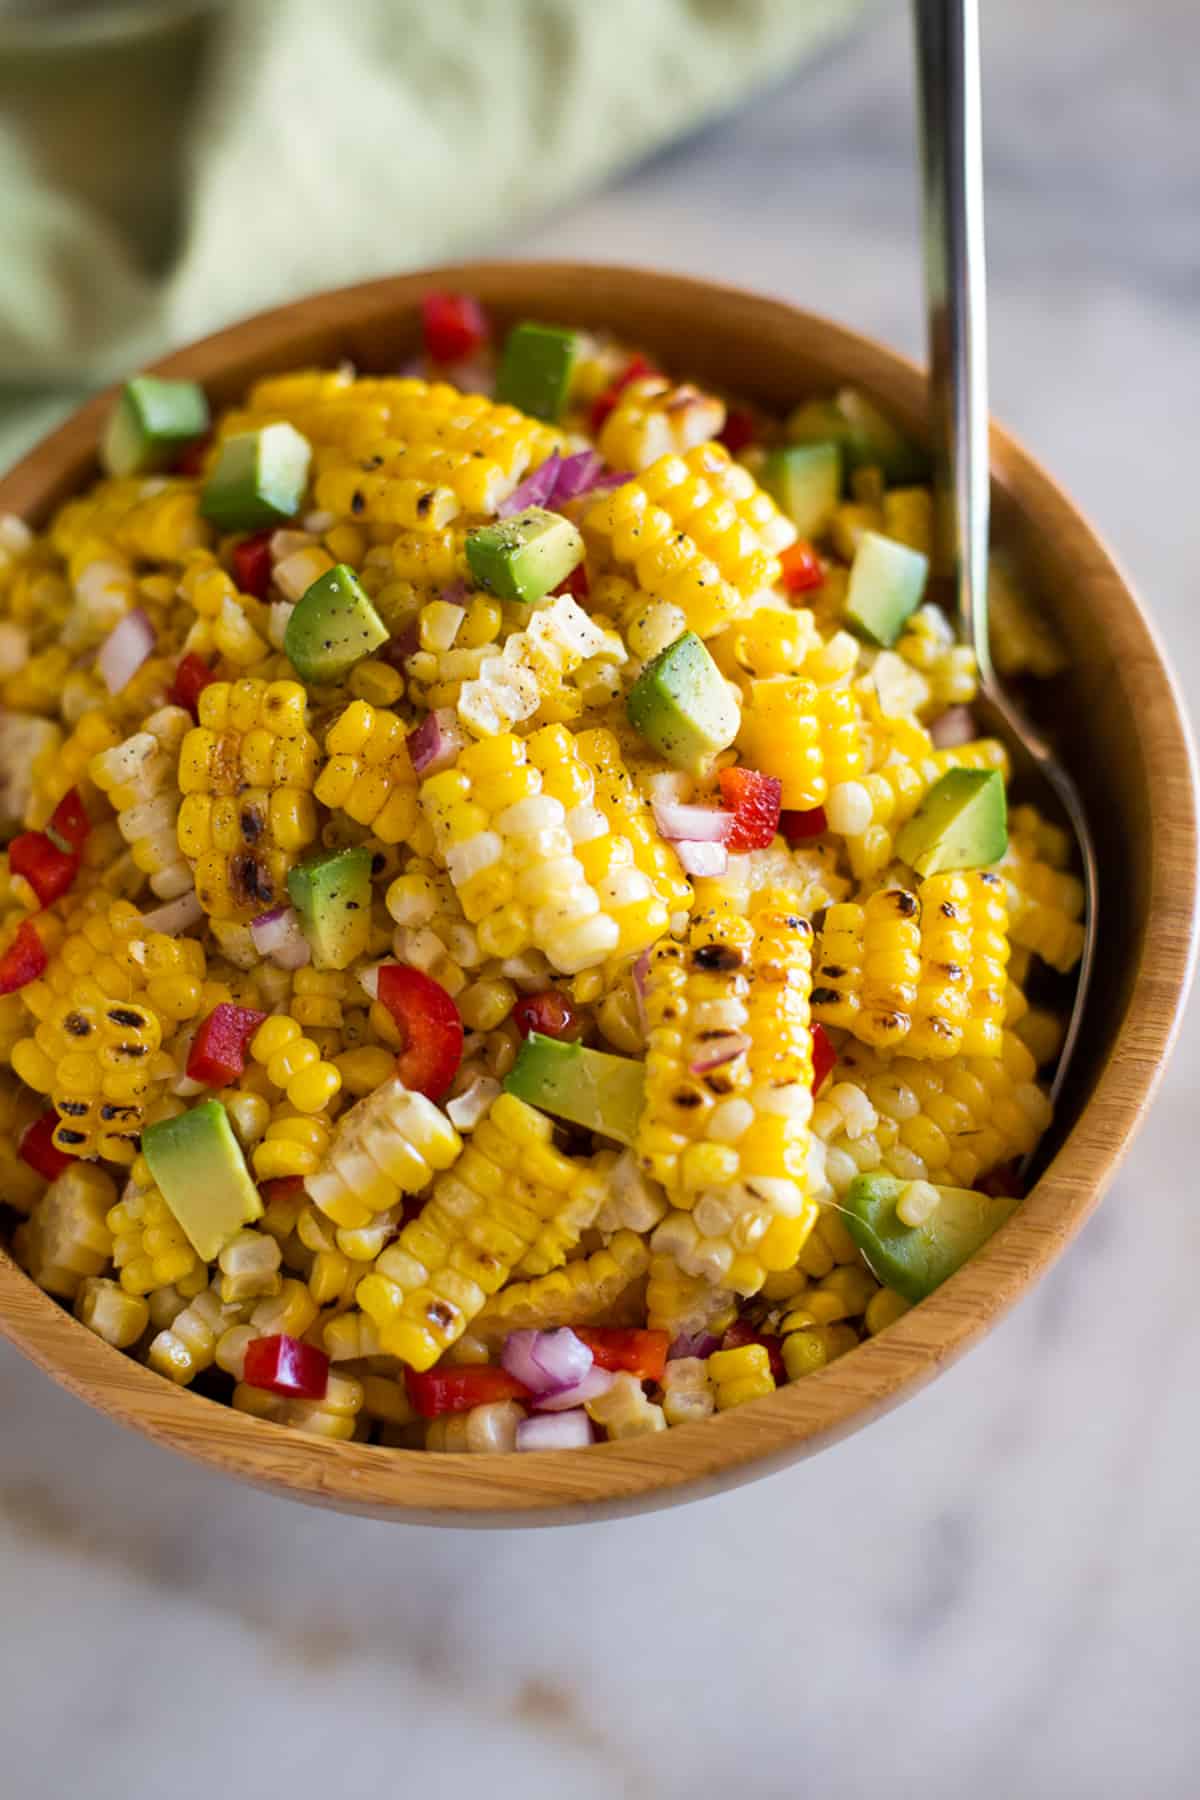 A fresh corn salad in a wooden bowl with bell pepper, red onion, and avocado.